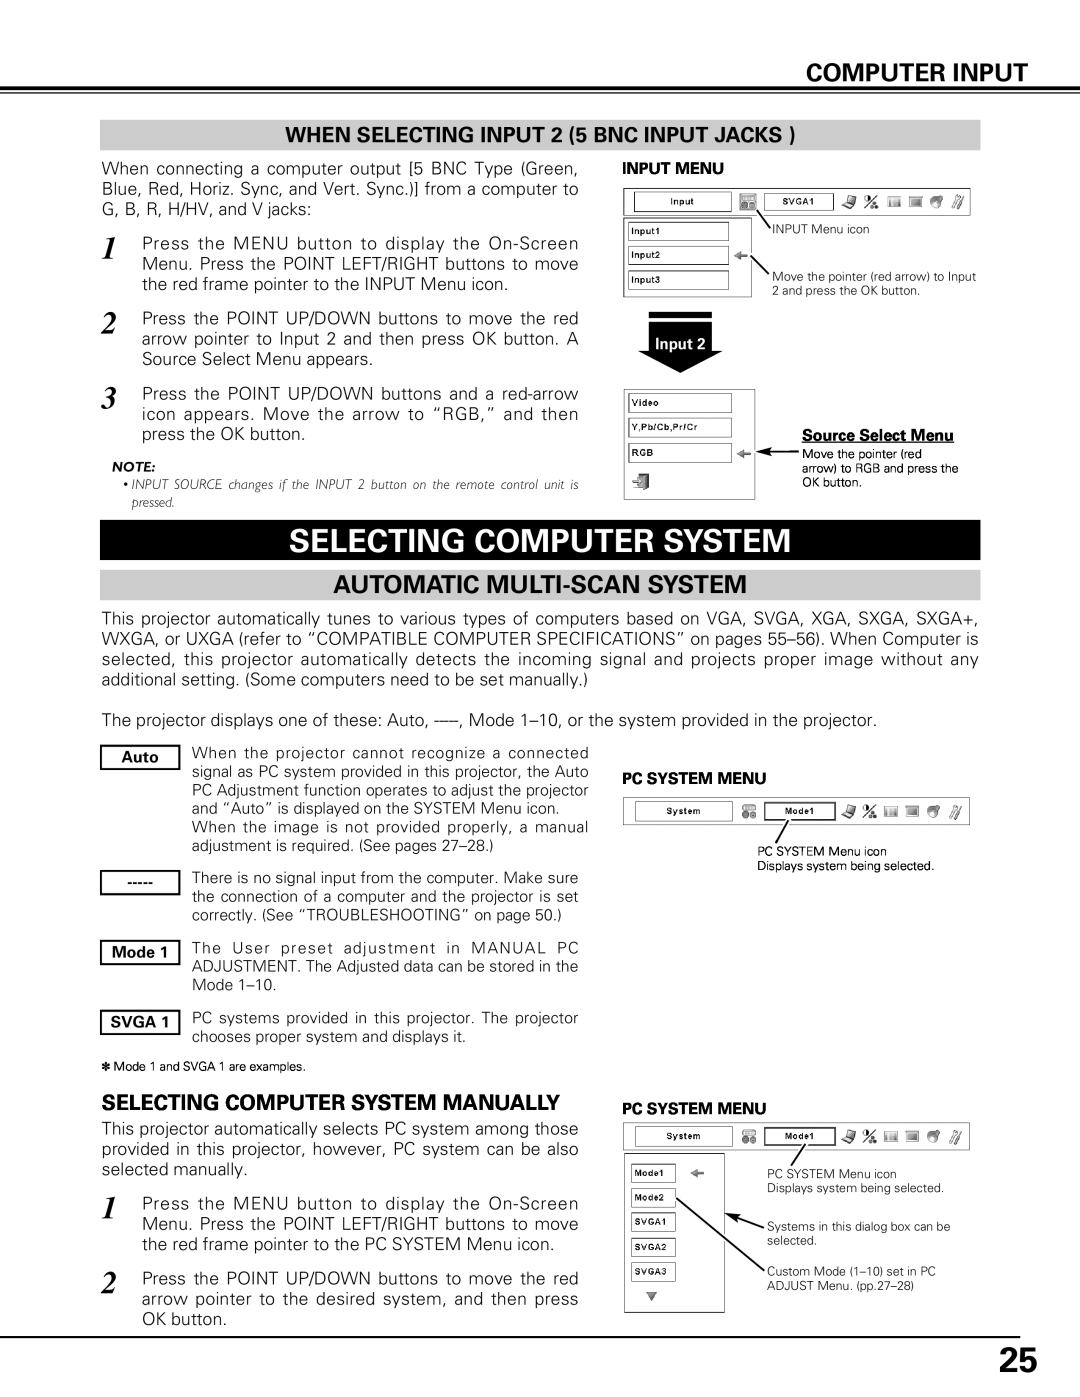 Canon LV-7575 user manual Selecting Computer System, Computer Input, Automatic Multi-Scan System 